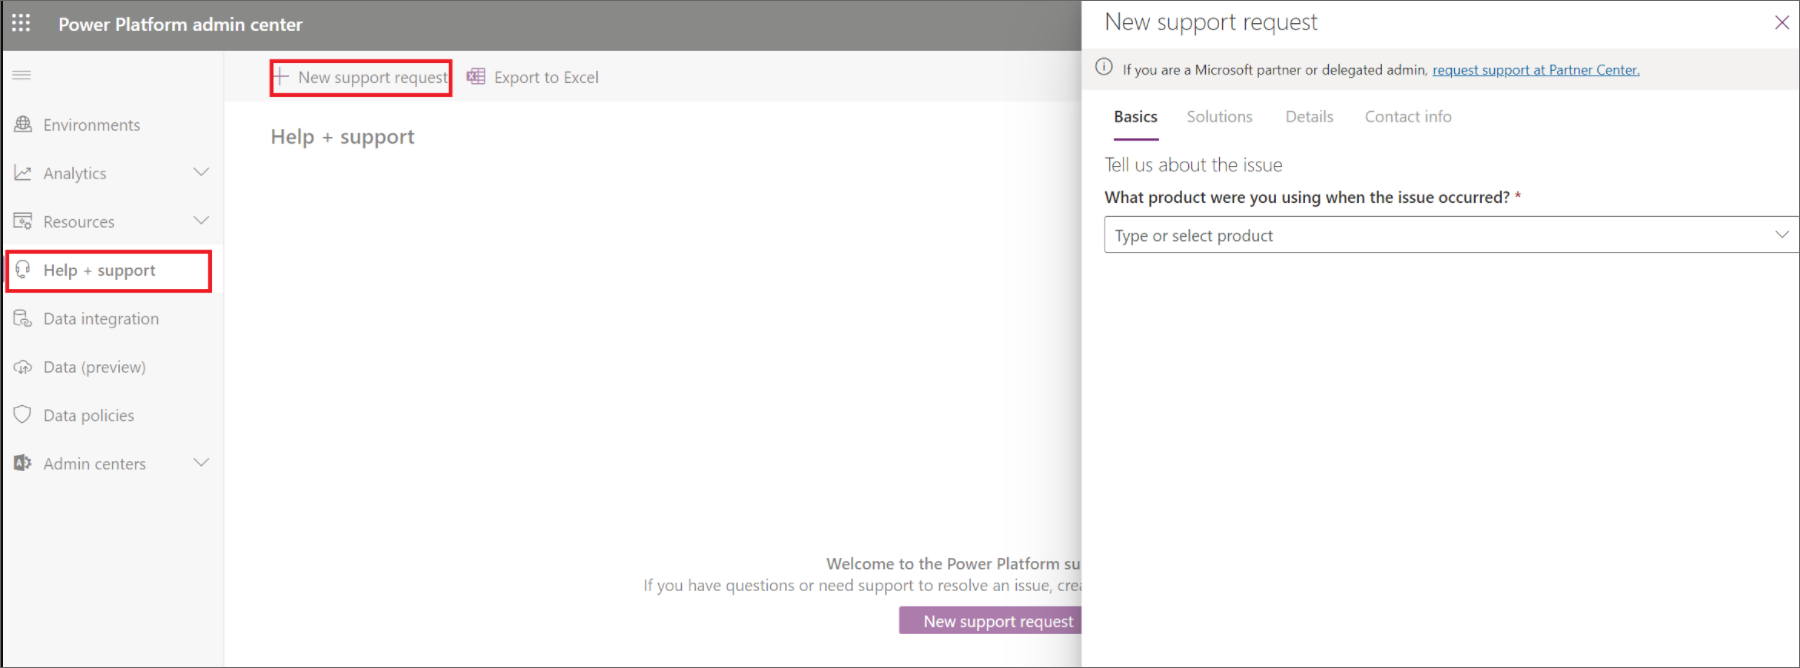 Image of a support request in Microsoft Power Platform.